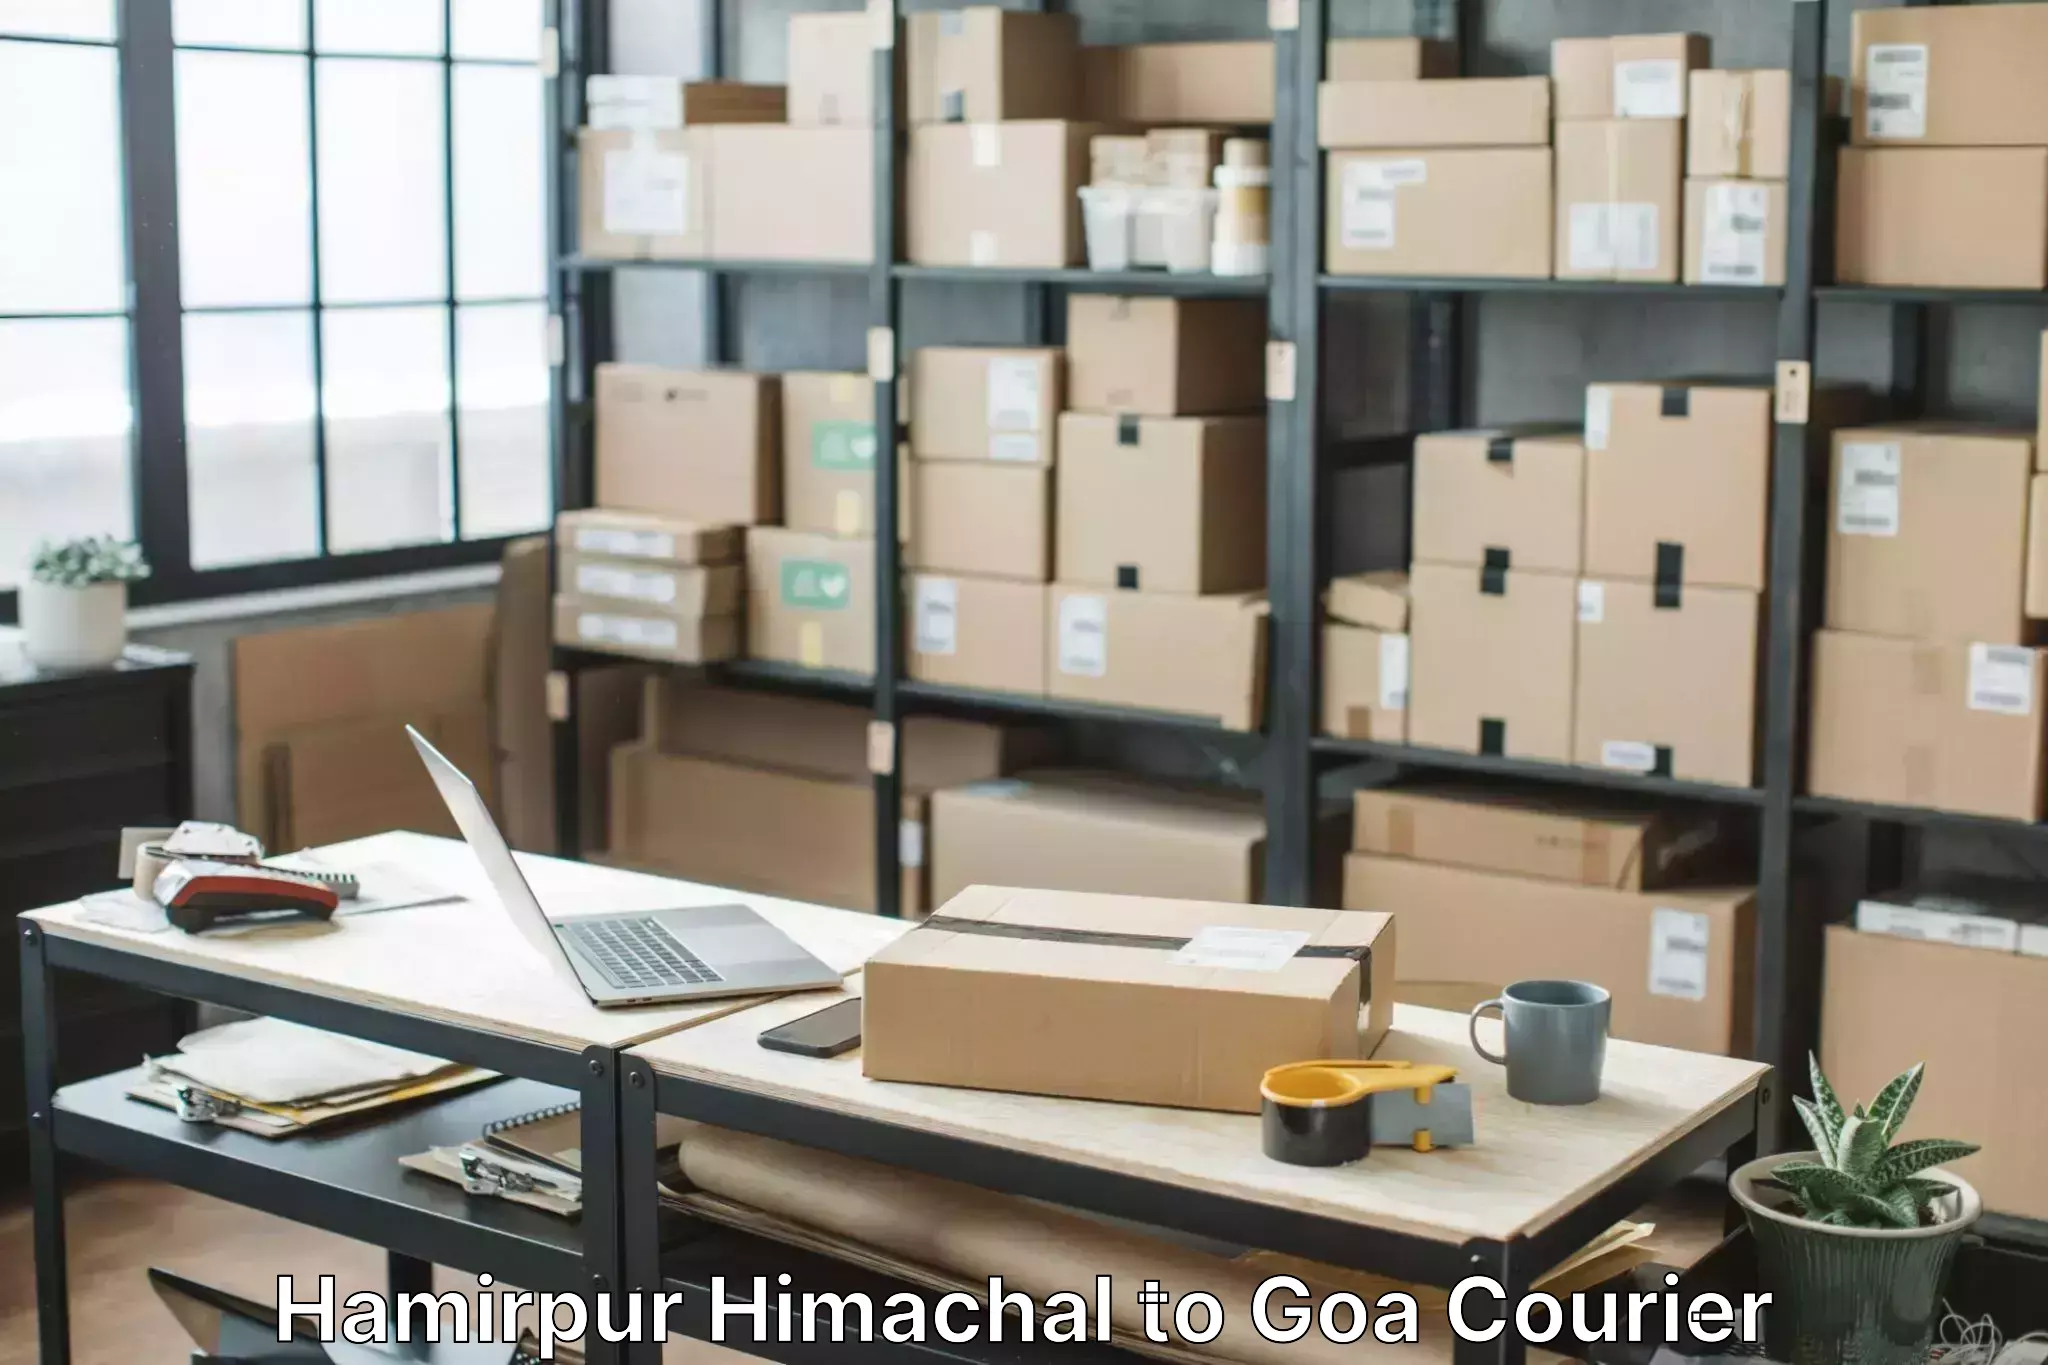 Furniture delivery service Hamirpur Himachal to Panjim